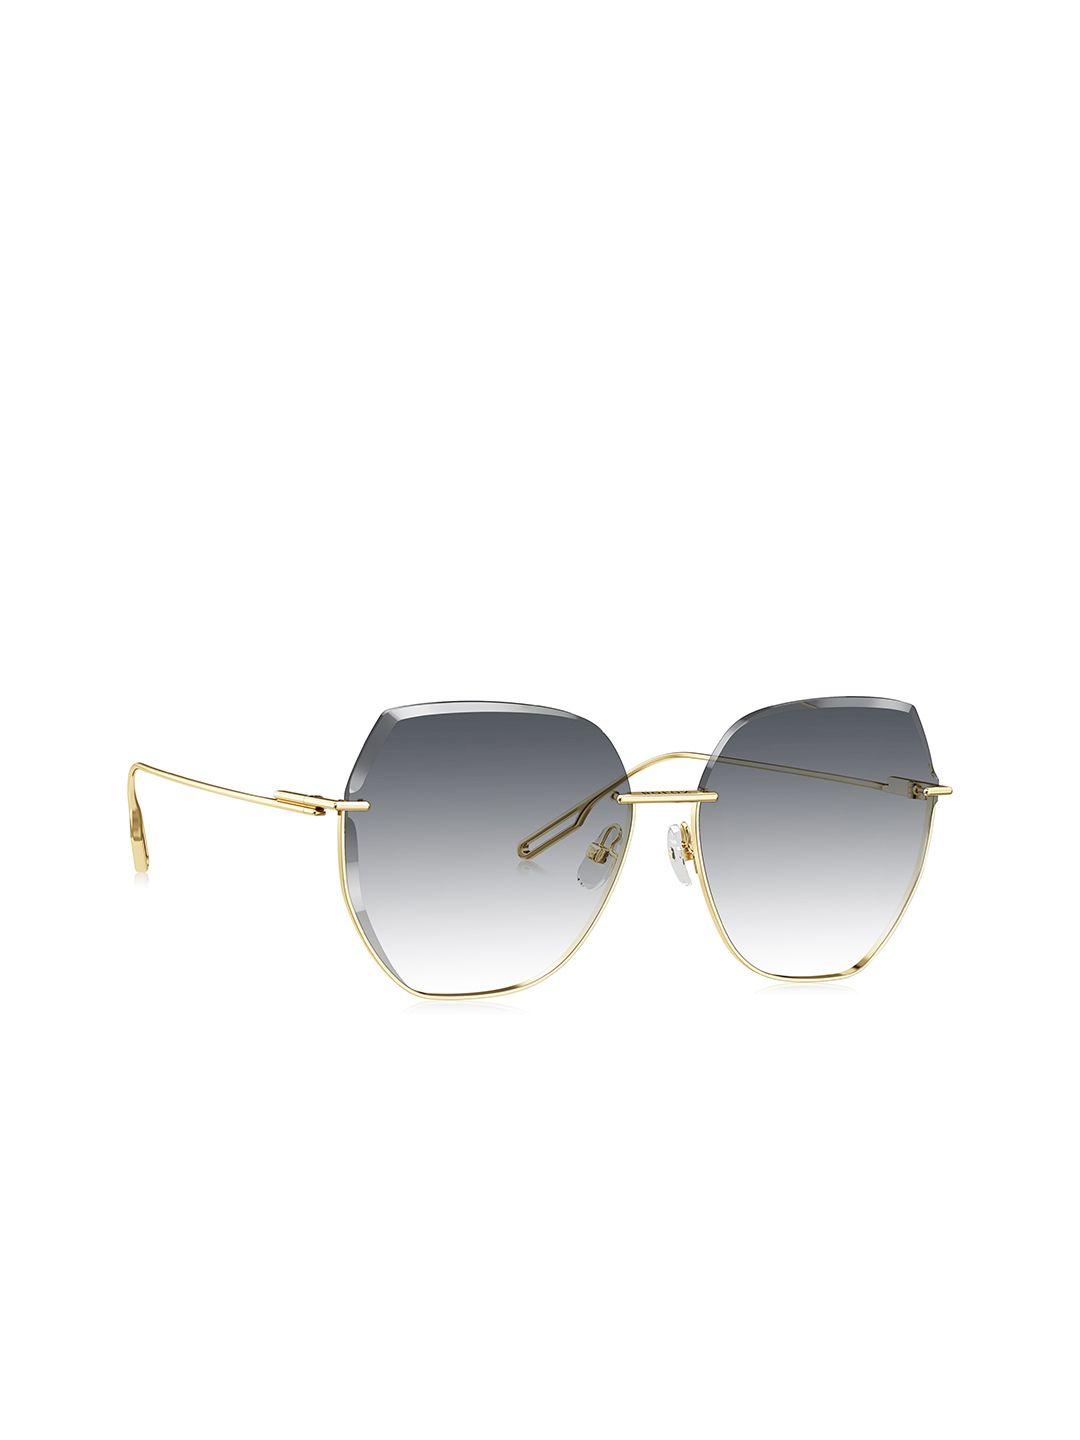 bolon eyewear women grey lens & gold-toned round sunglasses with uv protected lens